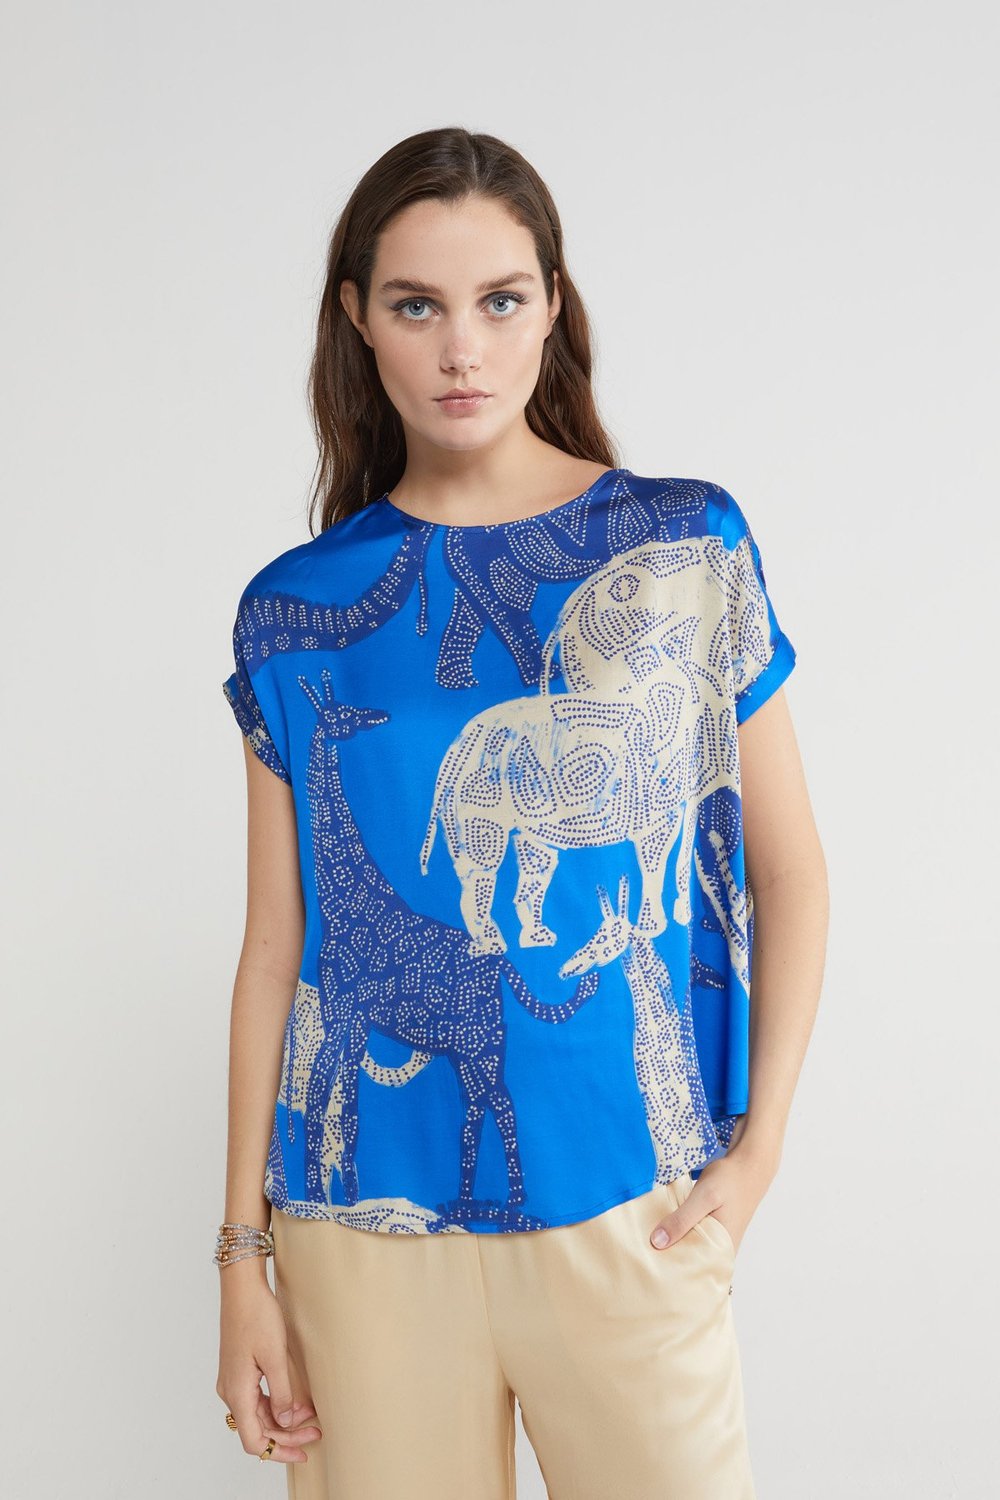 Ciara Blouse in Jungle Blues from Ottod'Ame